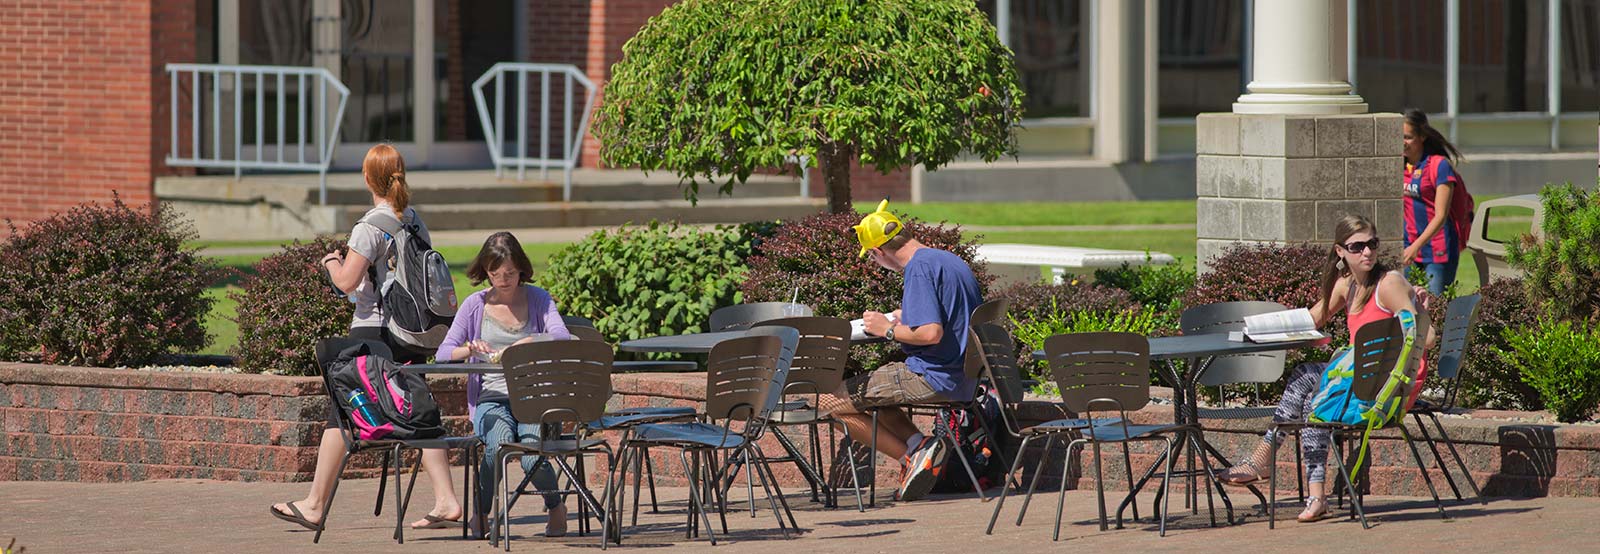 Students studying on patio